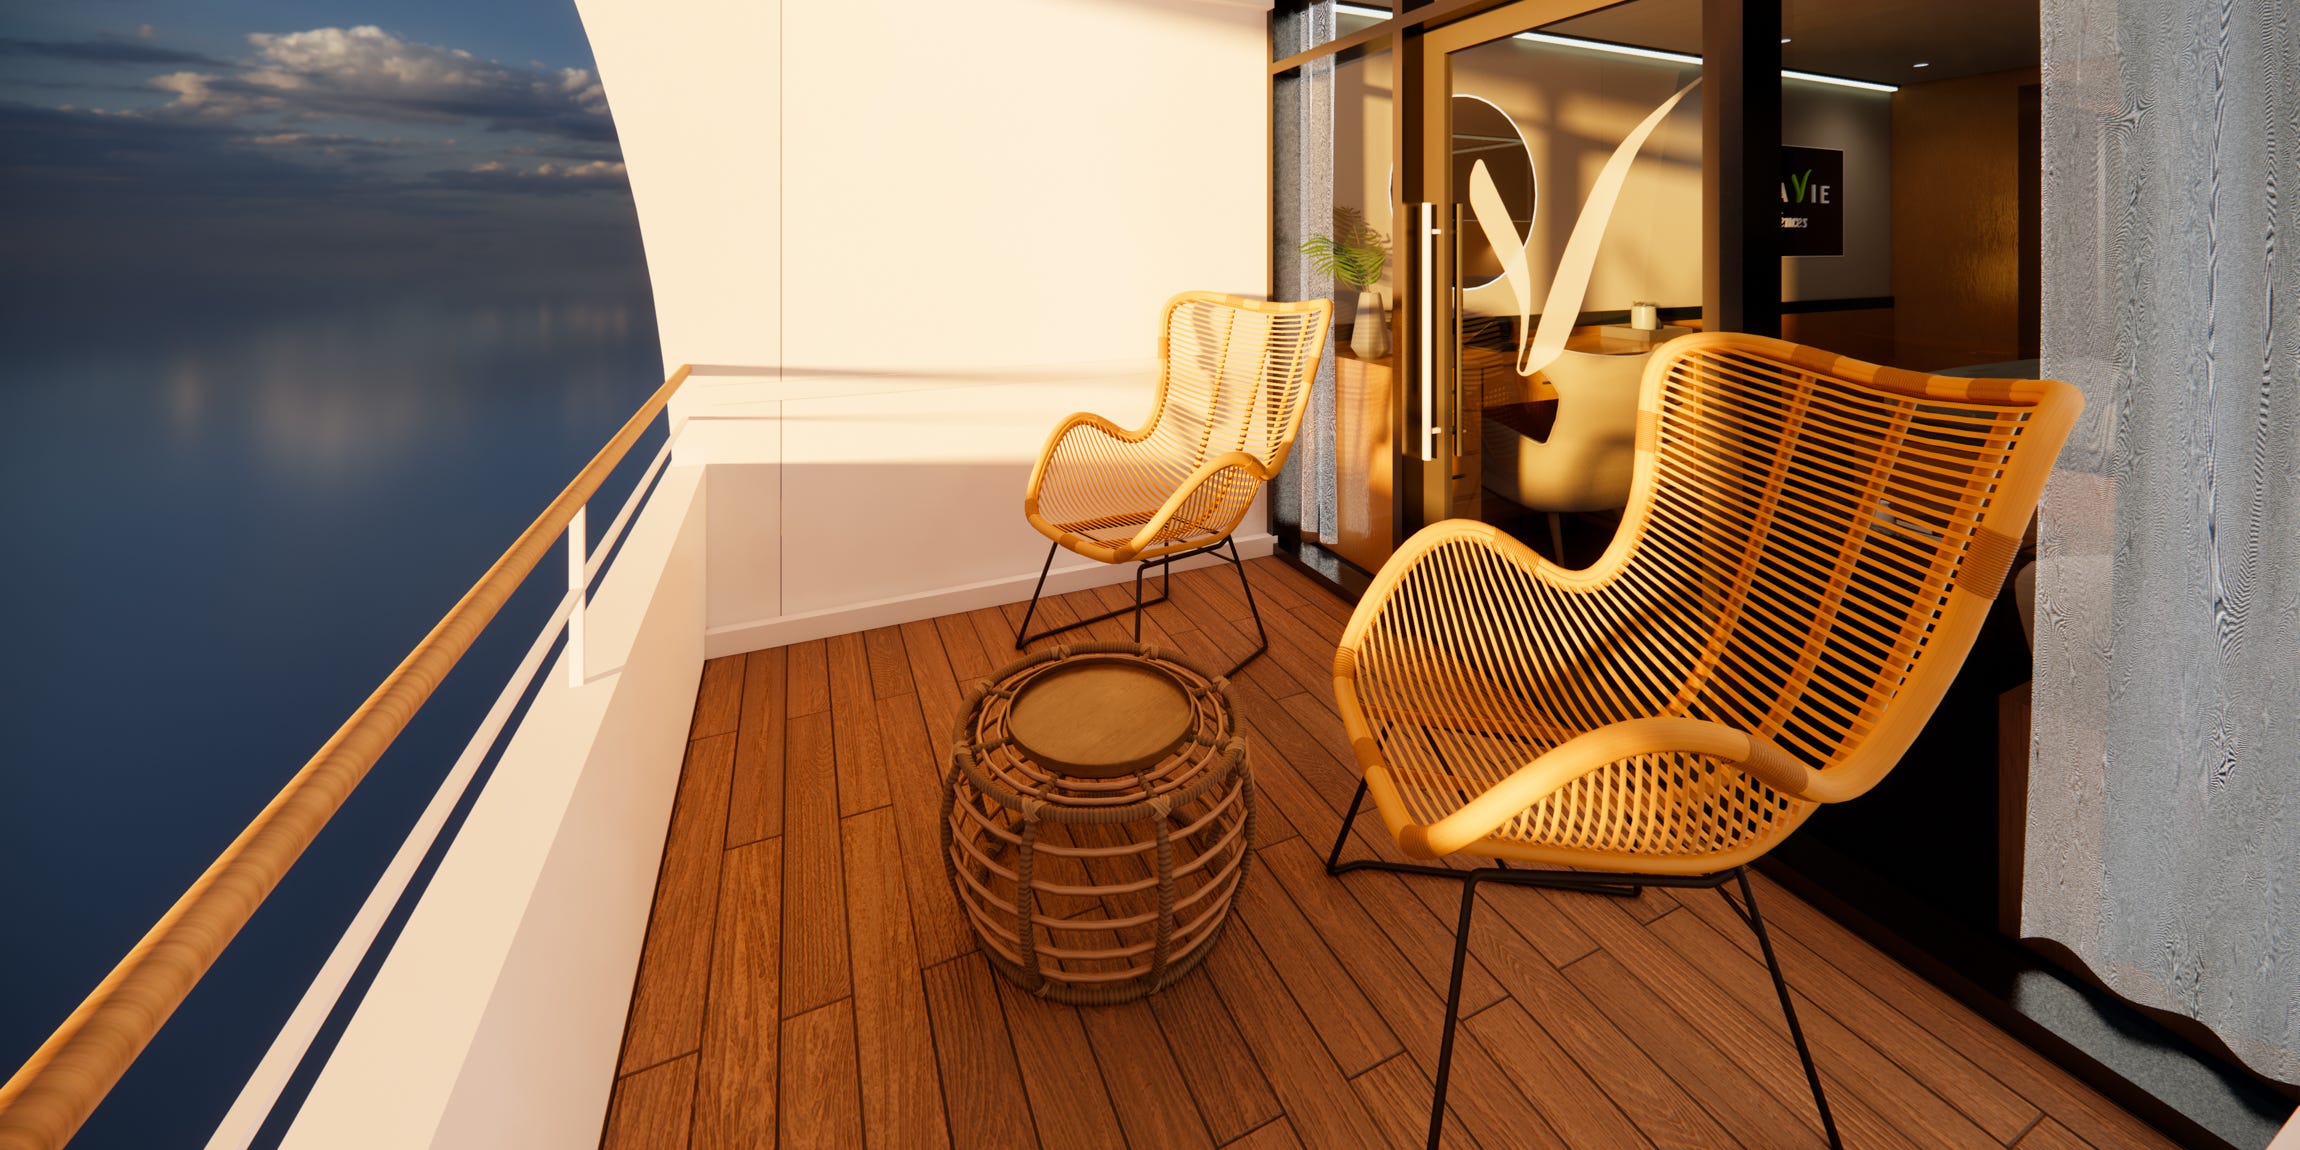 A balcony with two chairs on Villa Vie's ship